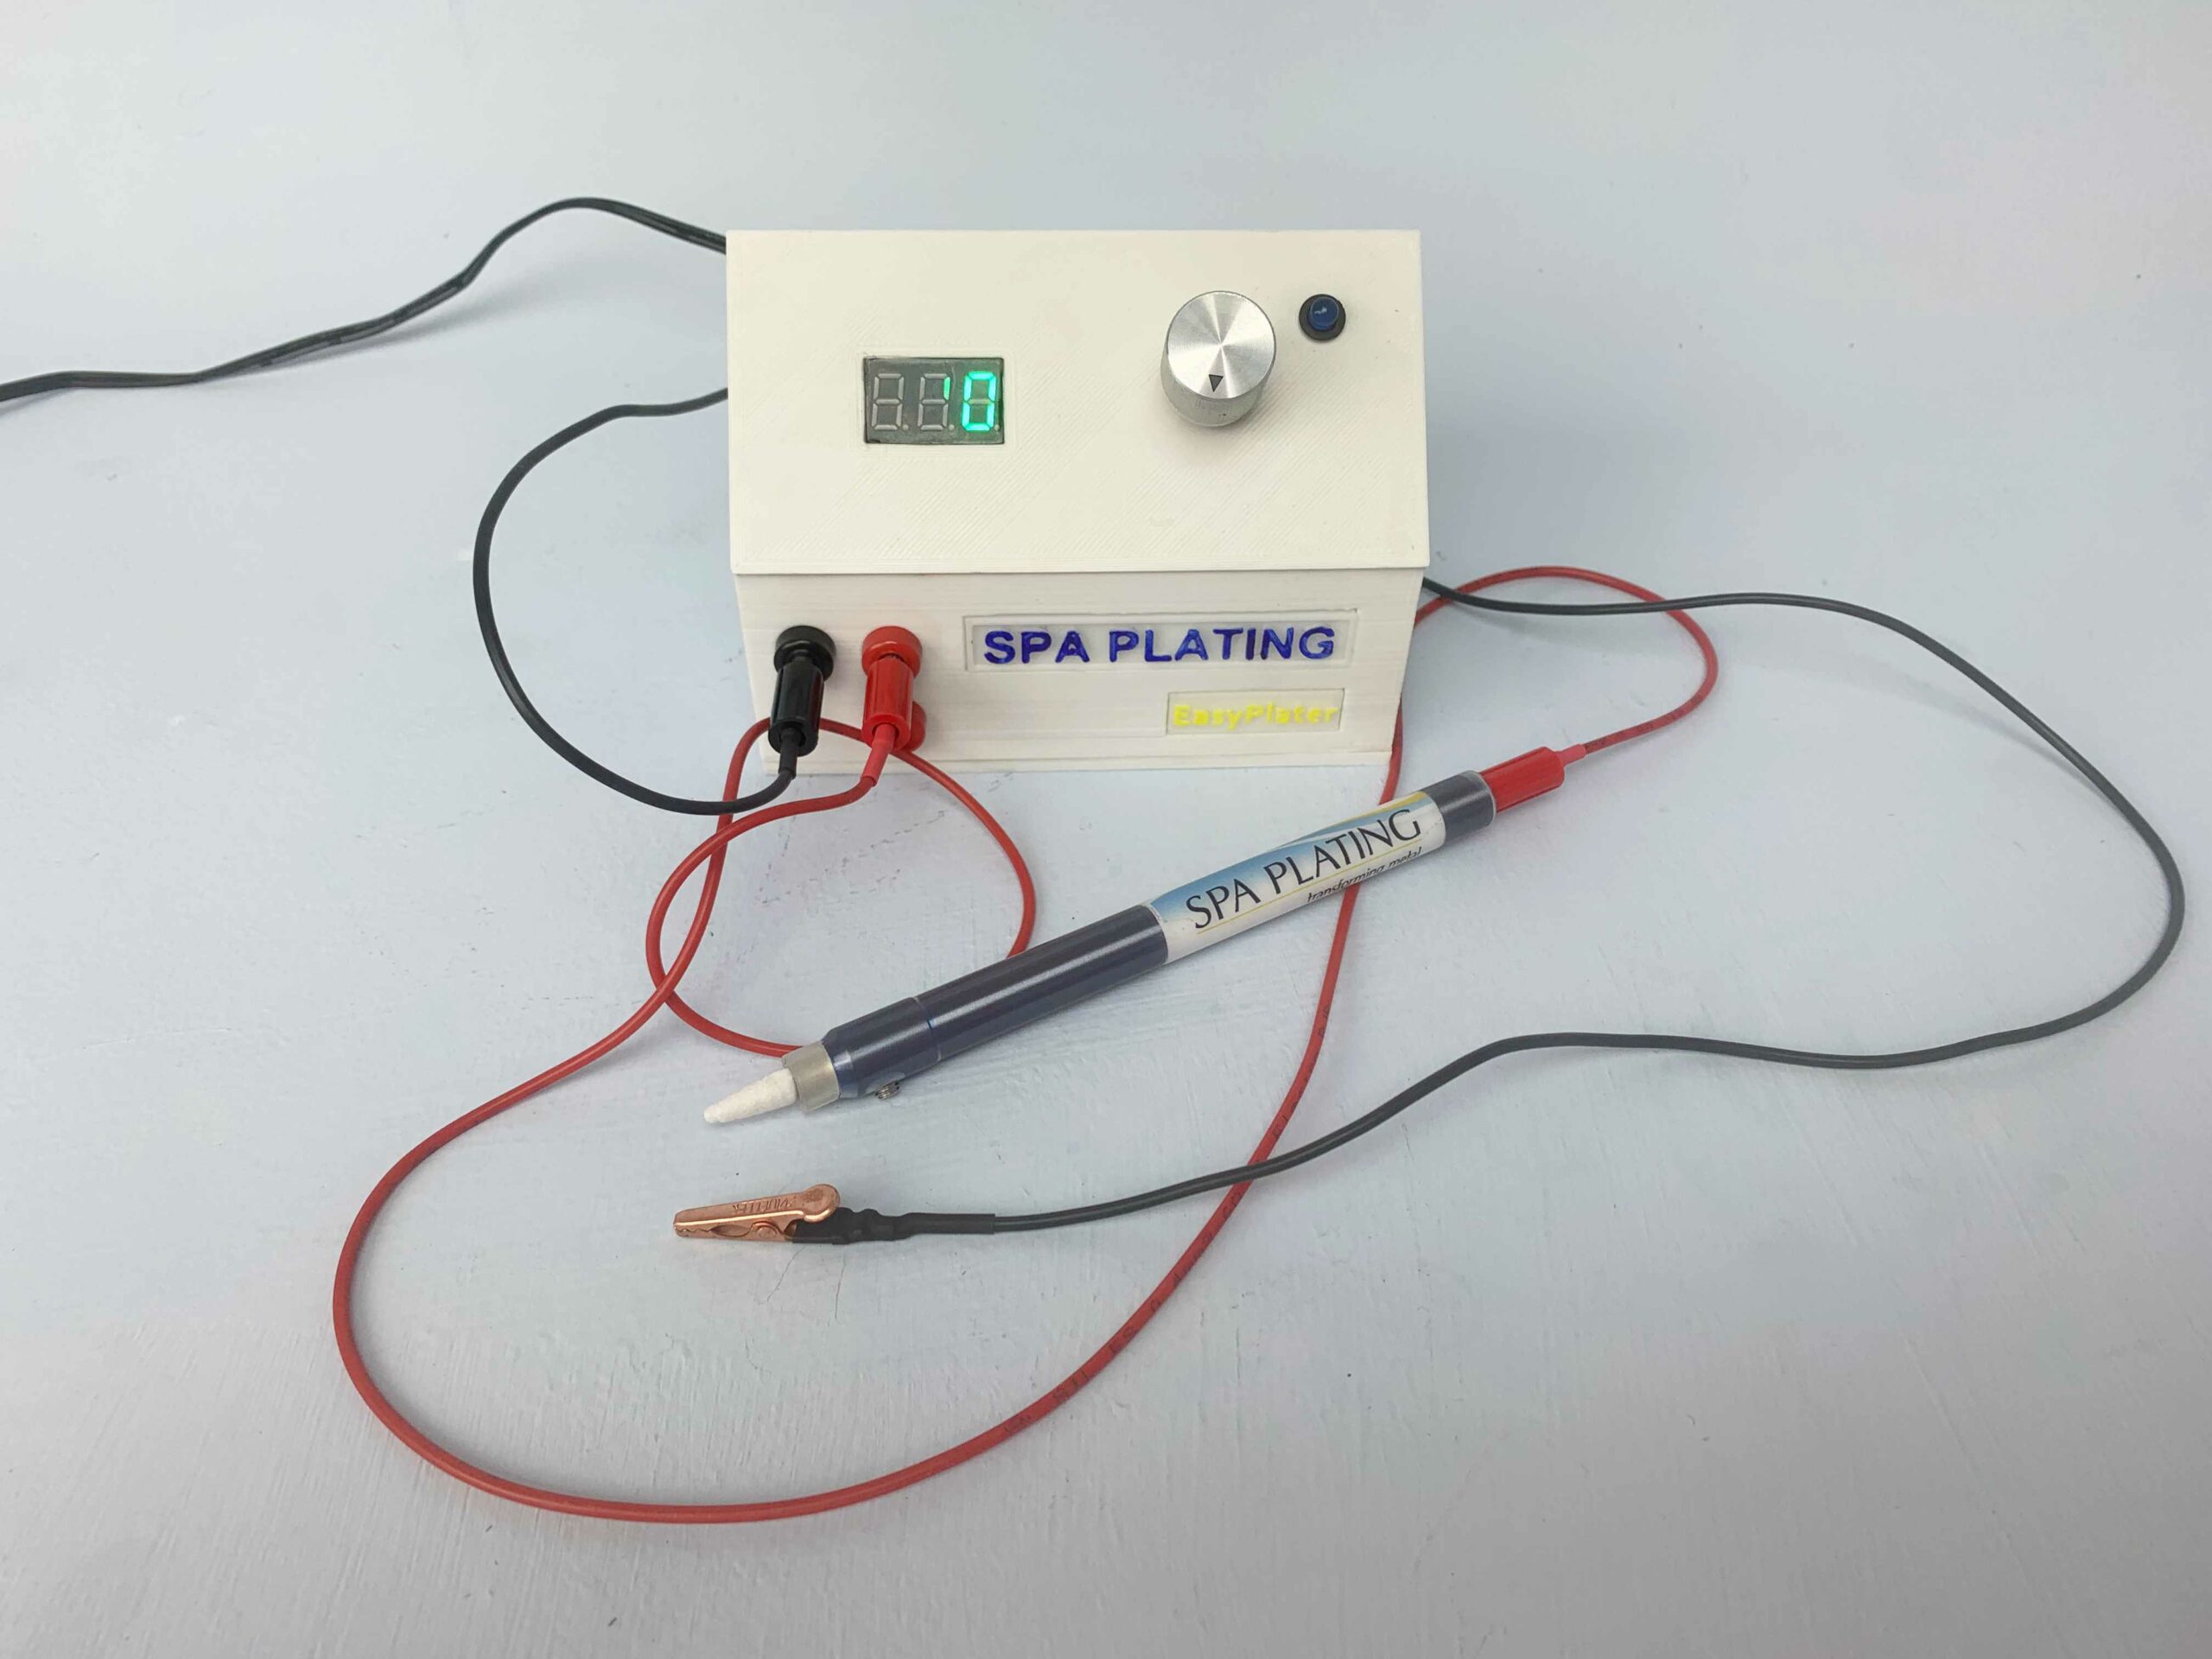 Battery Powered Gold and Silver Pen Plating Kit - Spa Plating